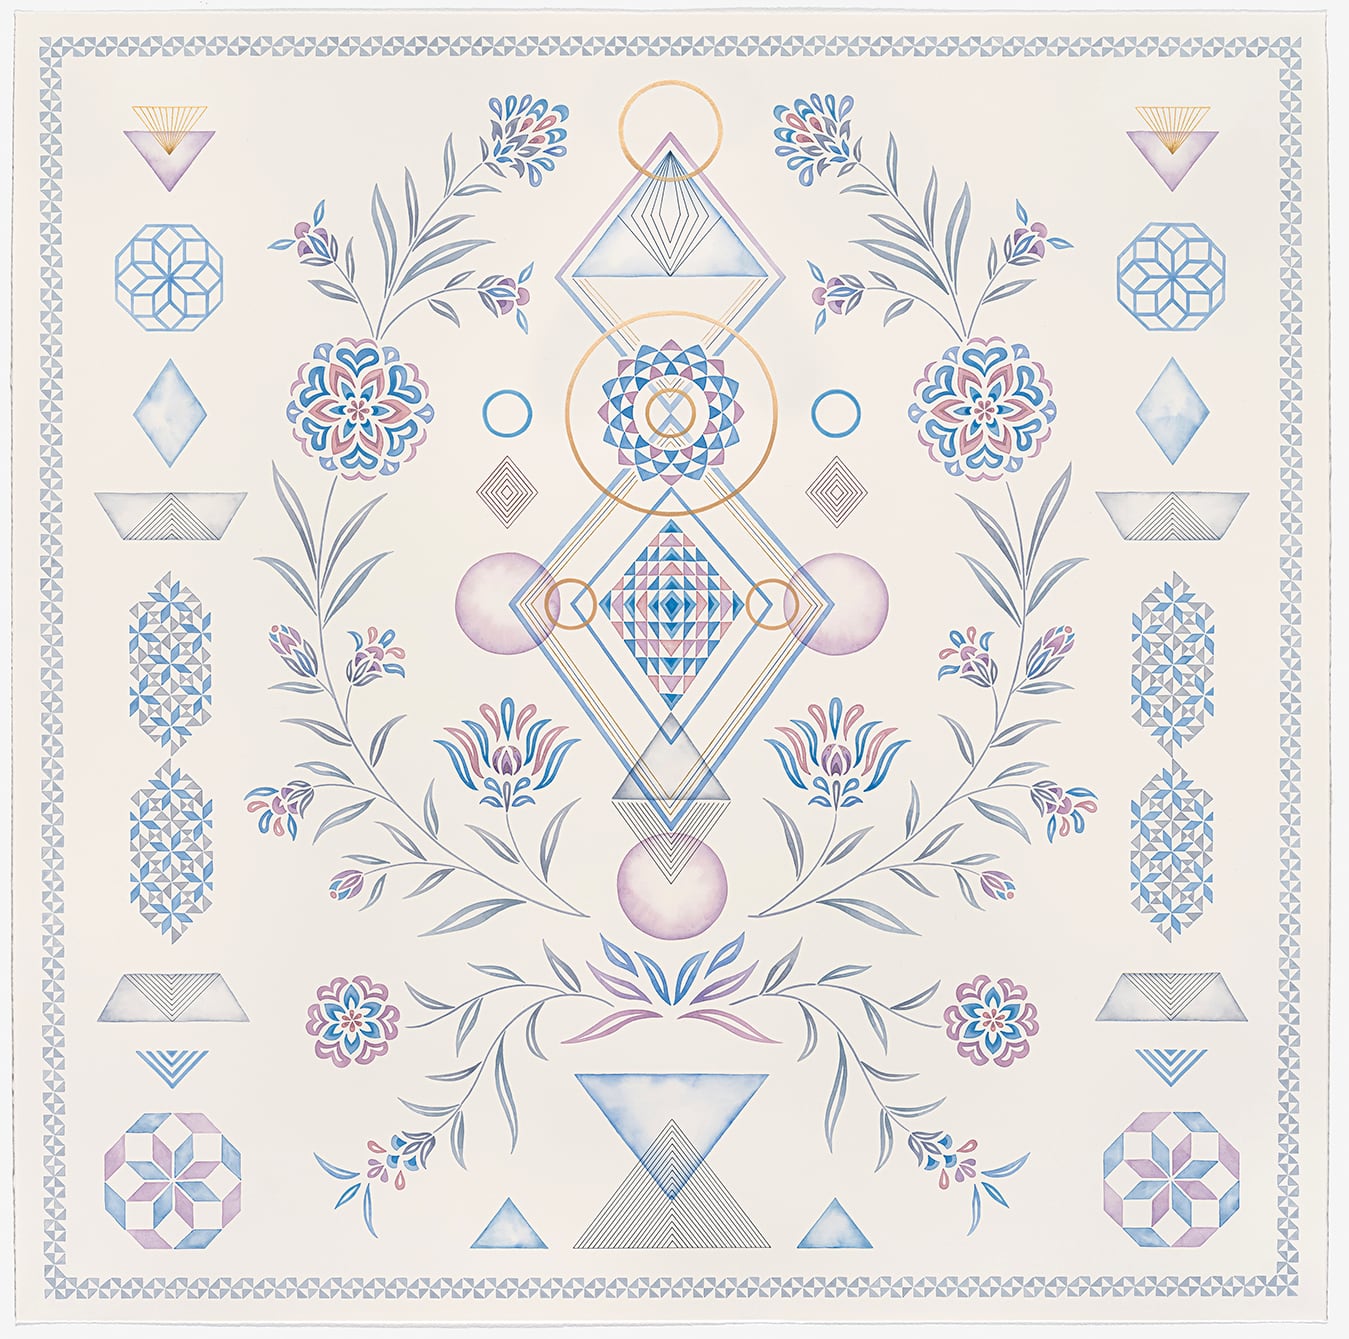 A symmetrical geometric and botanical design in blue, yellow and red